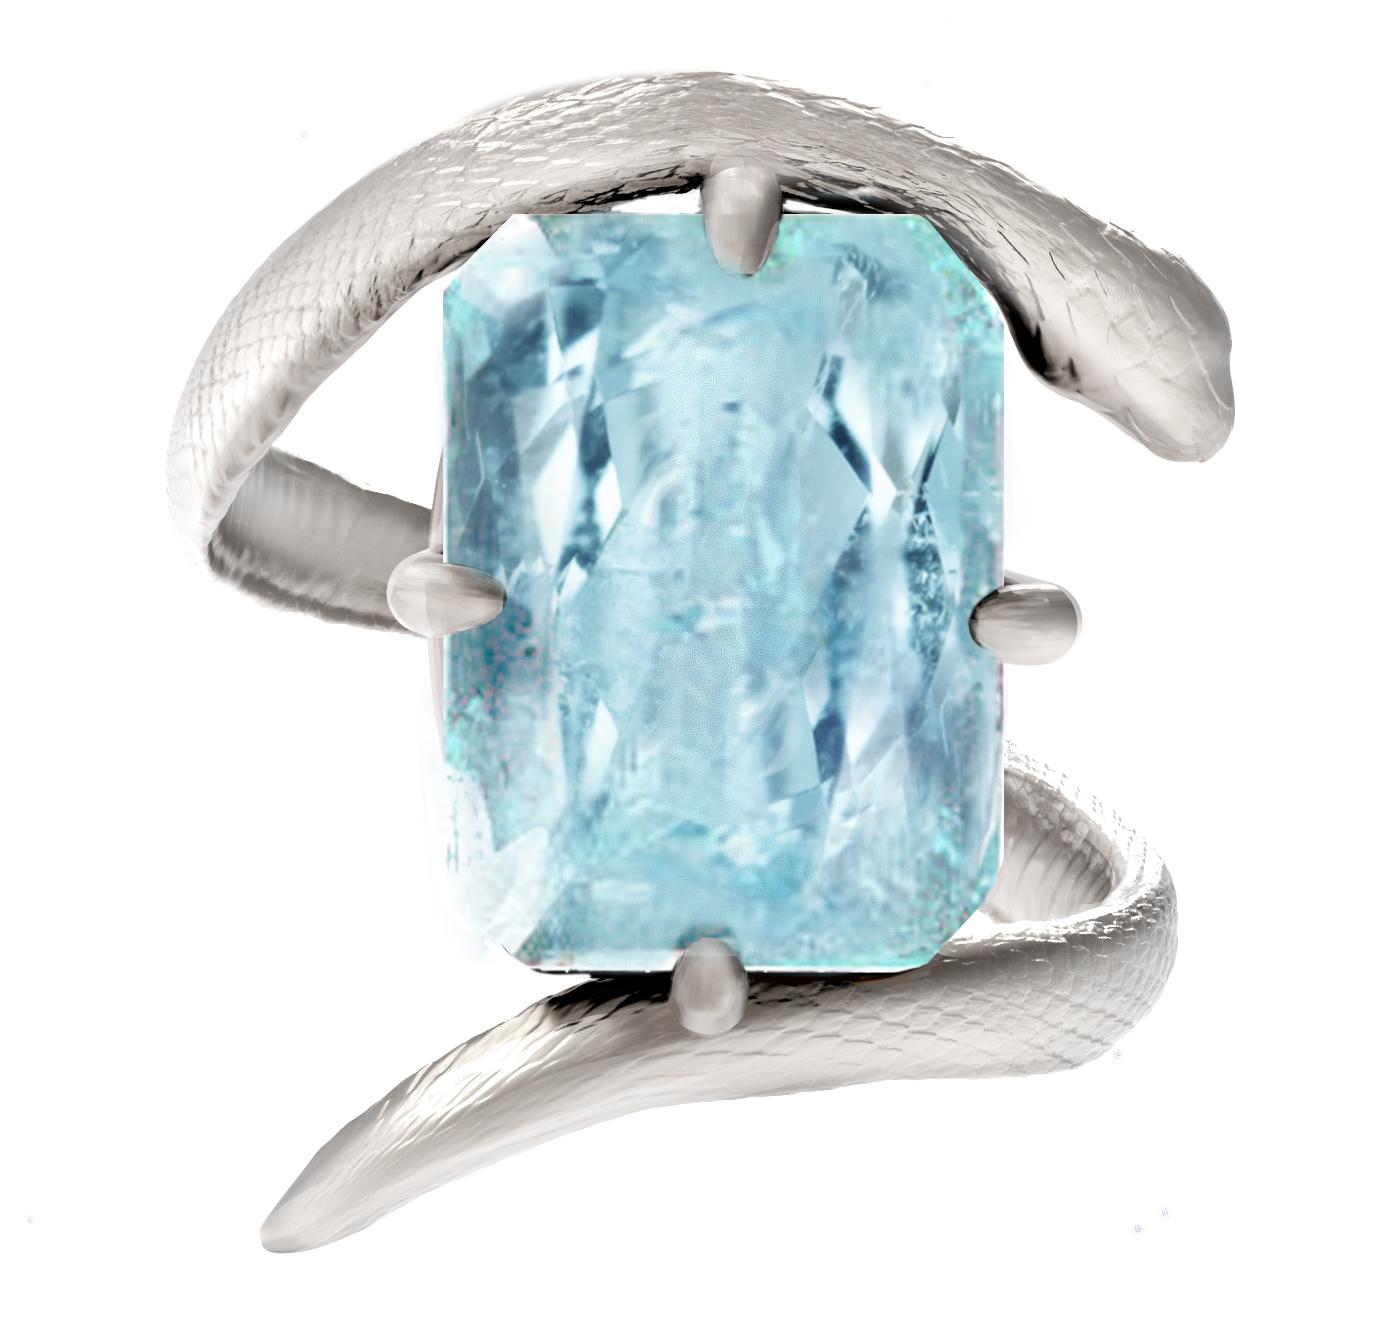 White Gold Egyptian Revival Engagement Ring with Blue Paraiba Tourmaline For Sale 1